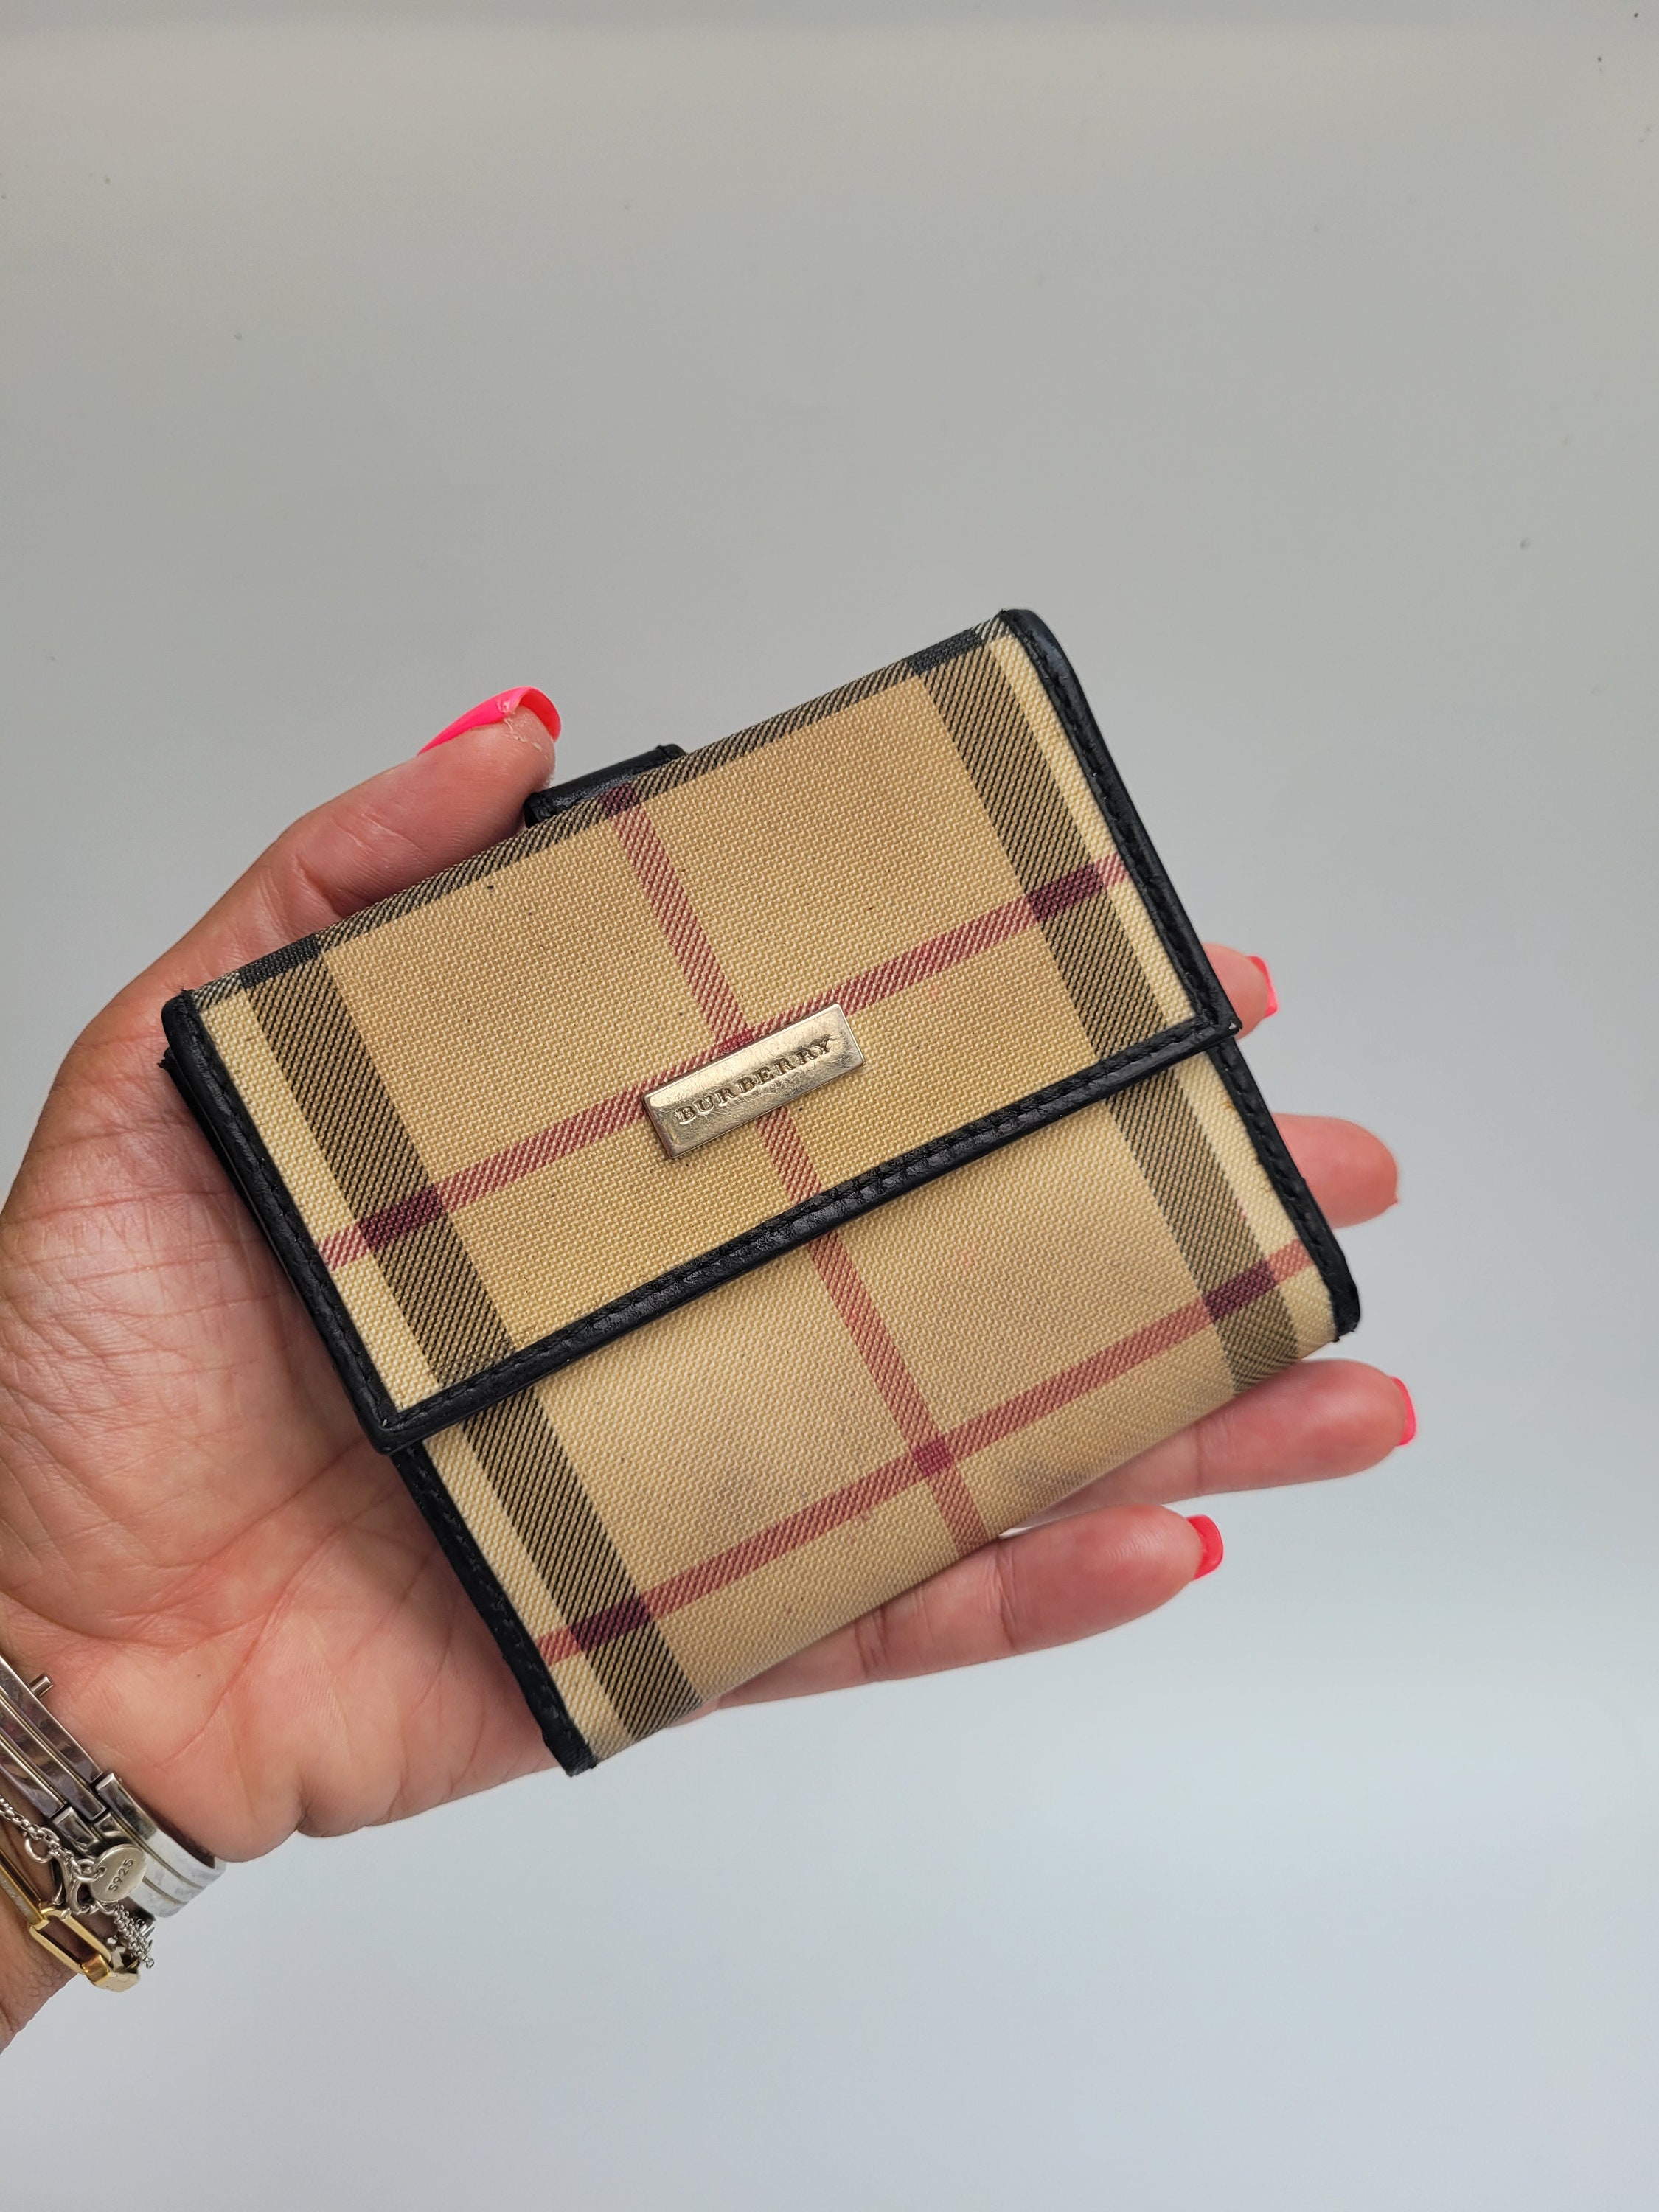 Burberry Somerset Check Coated Canvas & Leather Card Case - ShopStyle